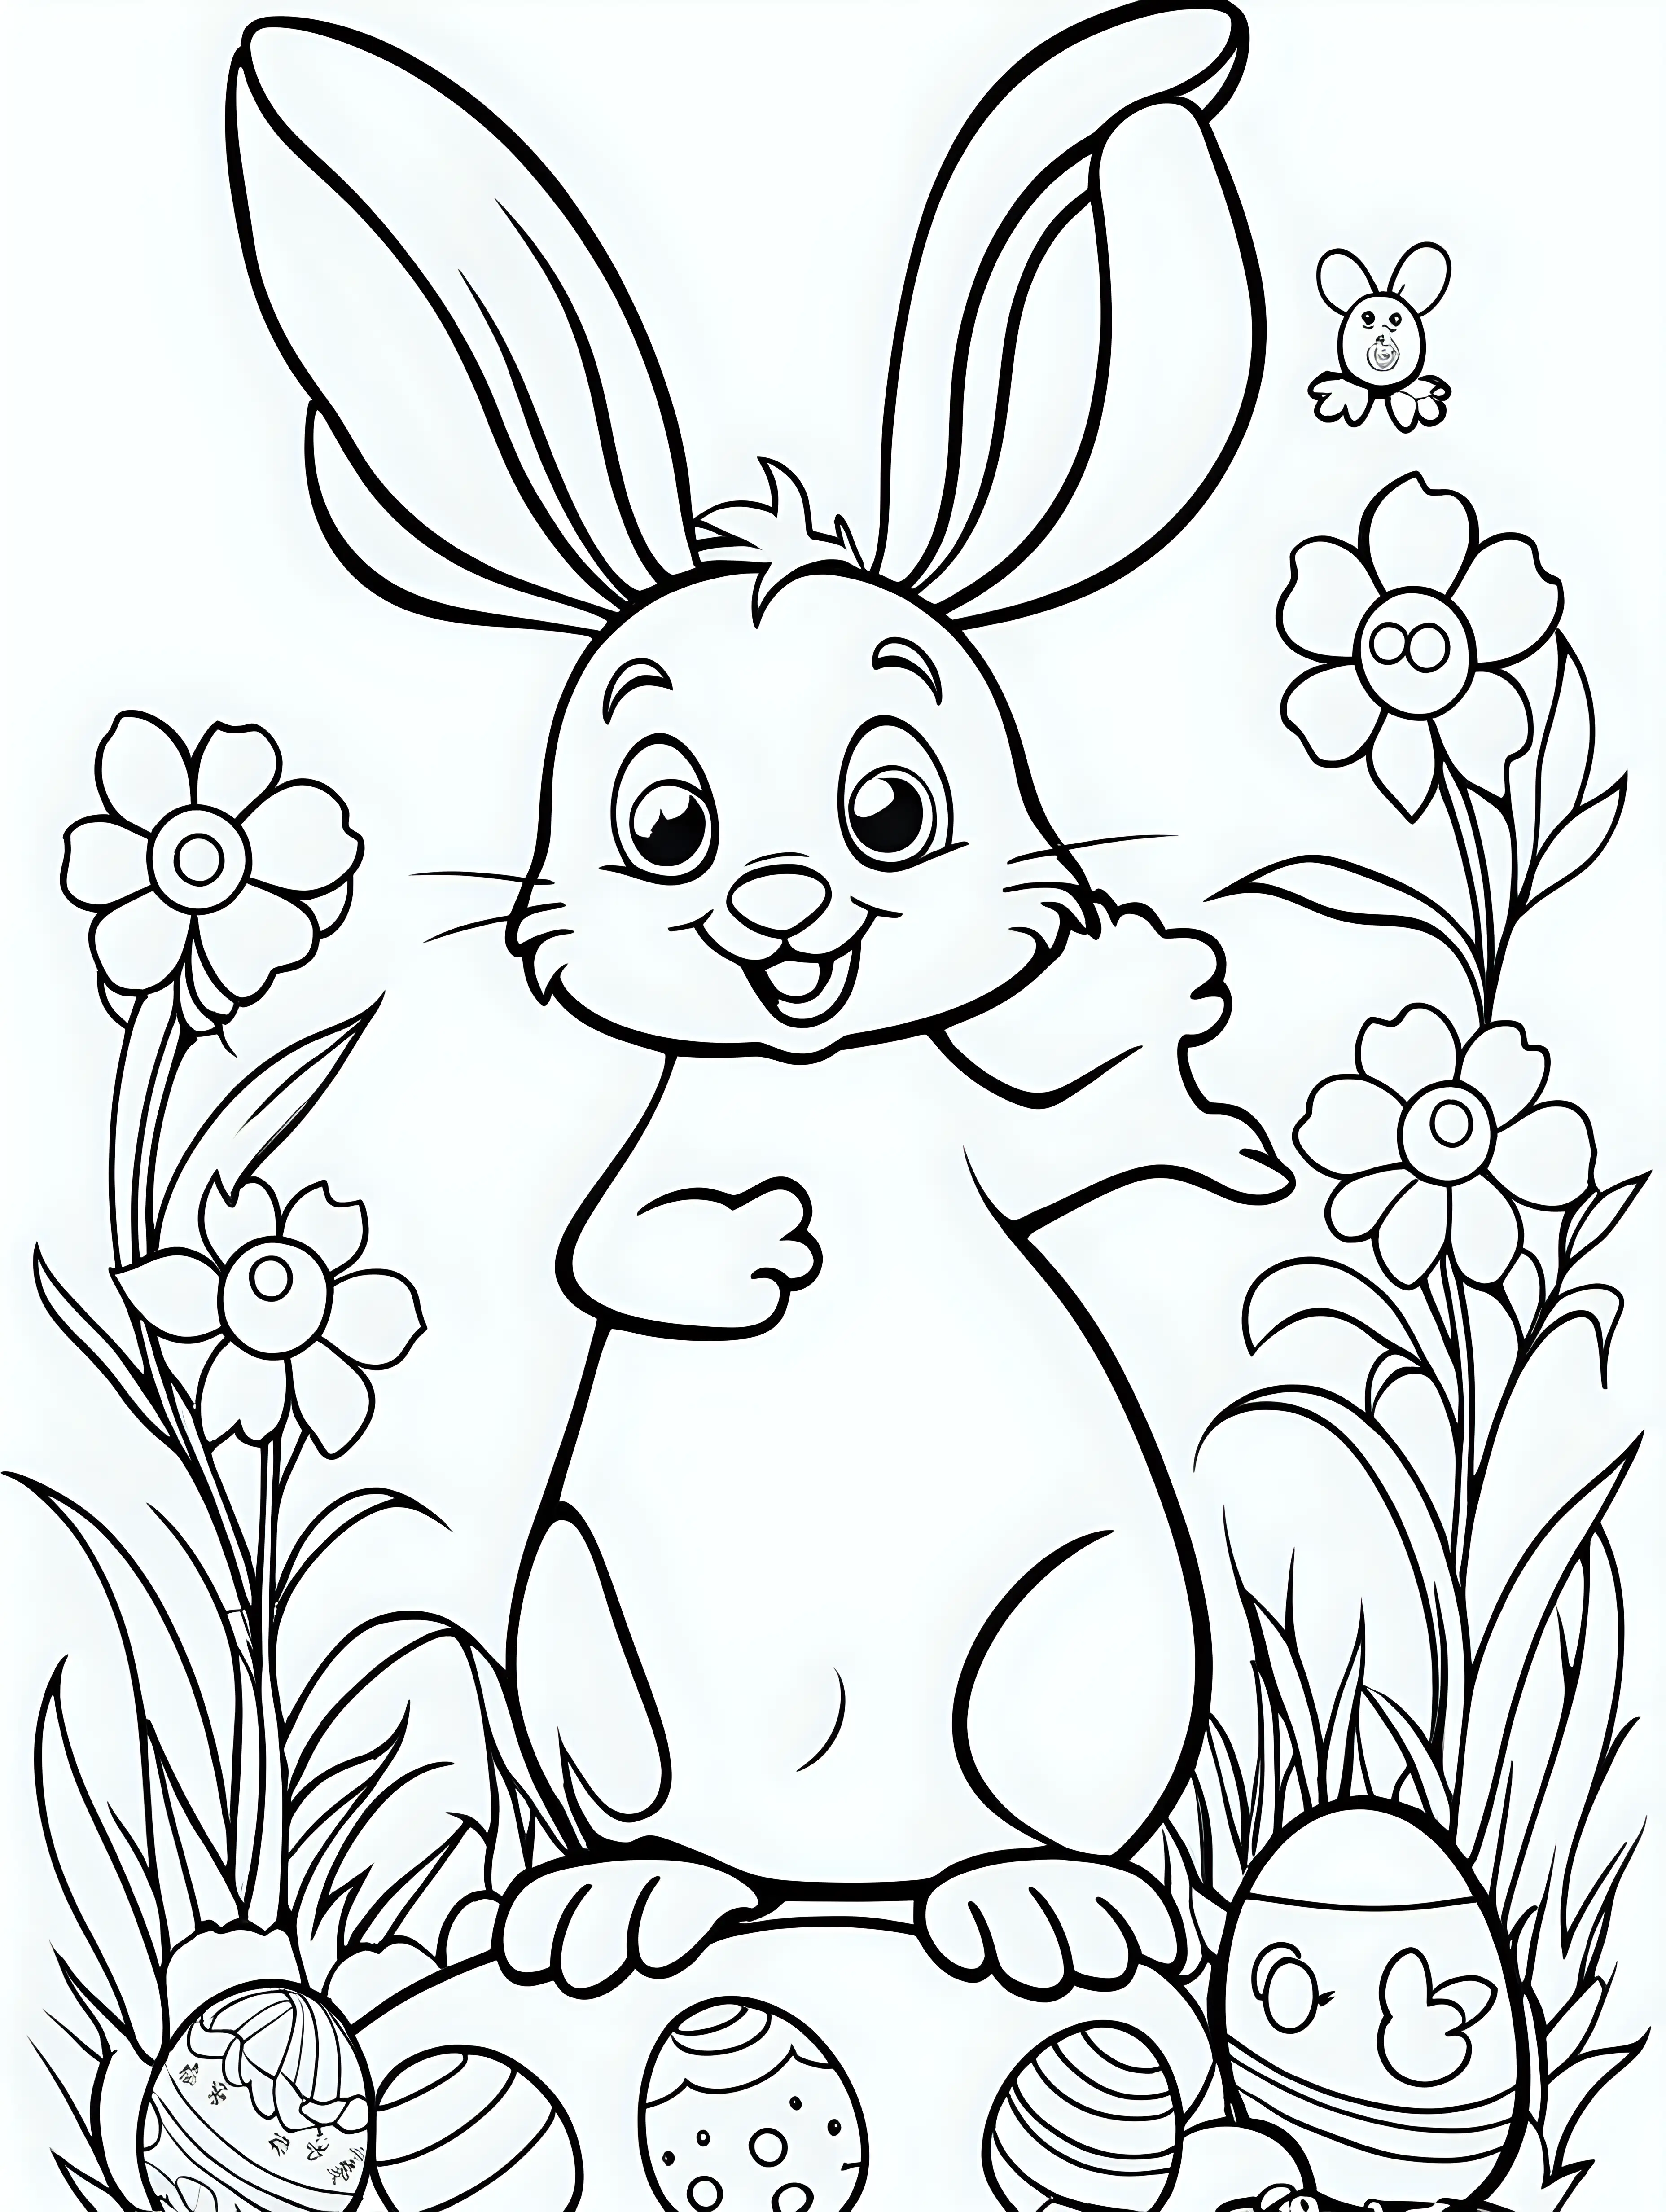 Easter Egg Coloring Page for Kids 47 Clean Line Art on White Background